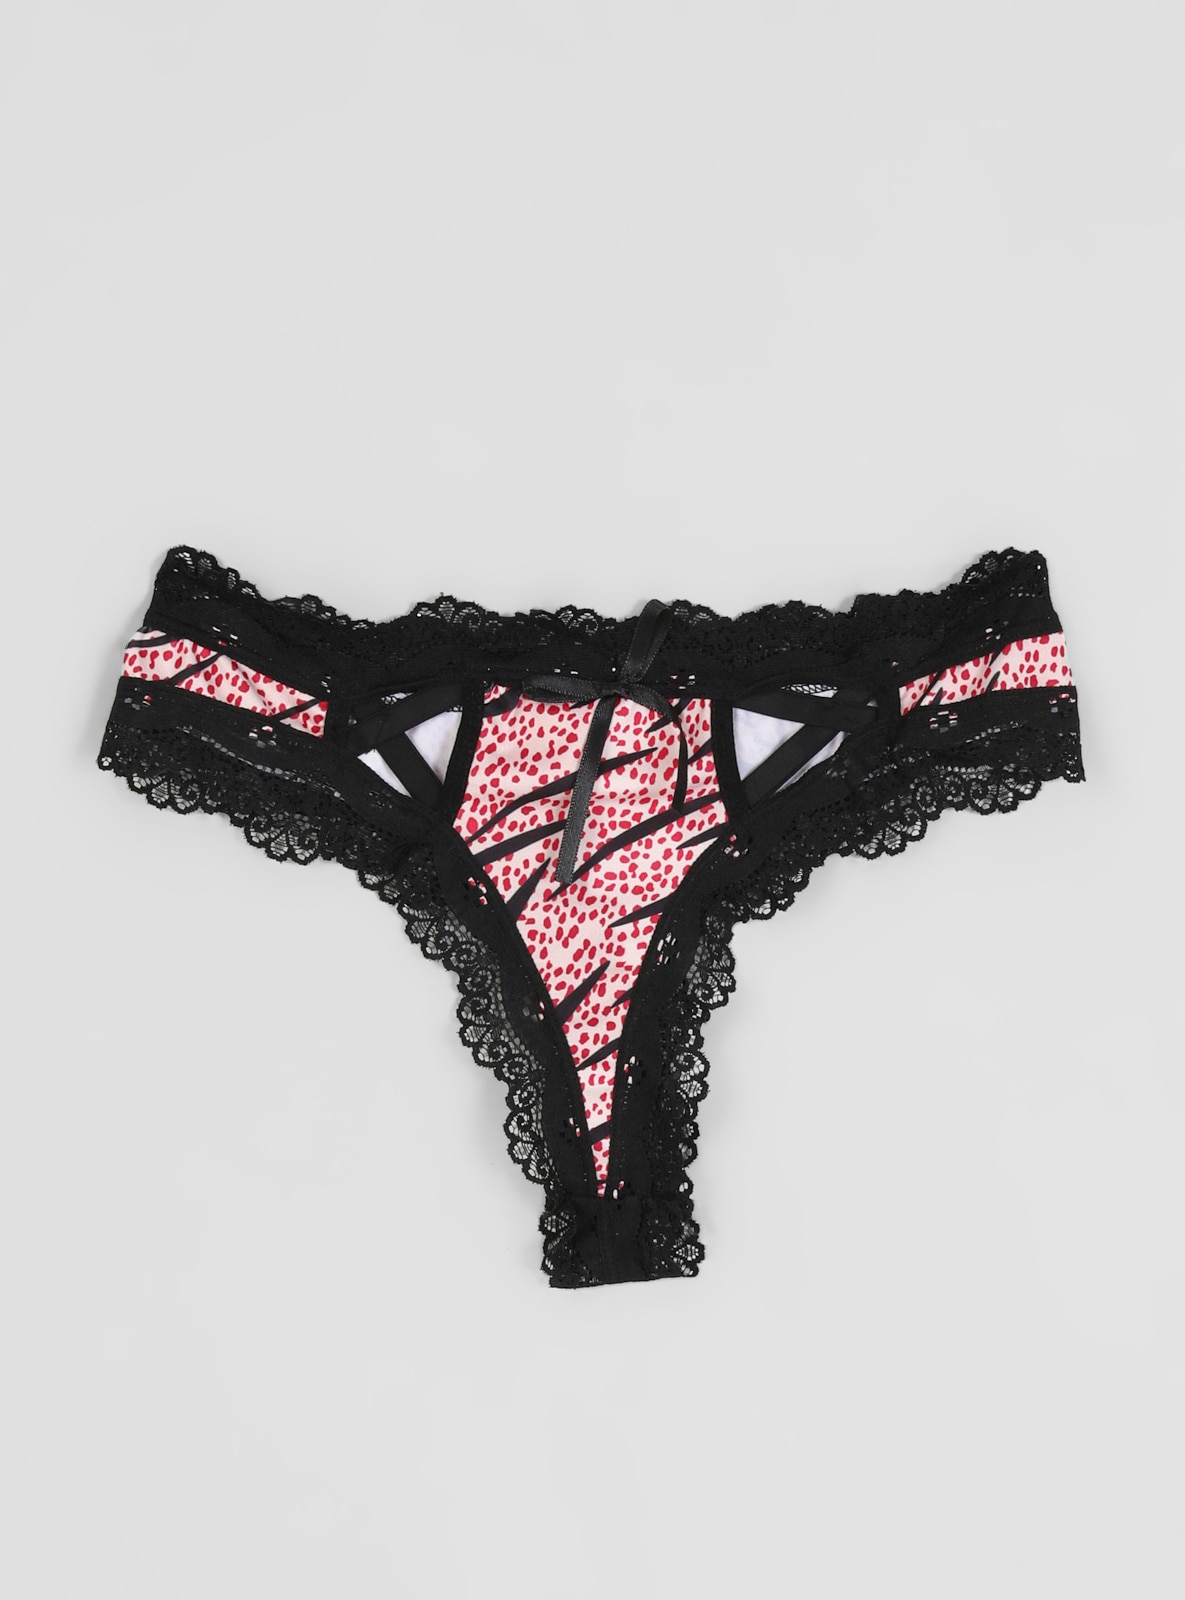 chris maniscalco recommends pink and black panties pic